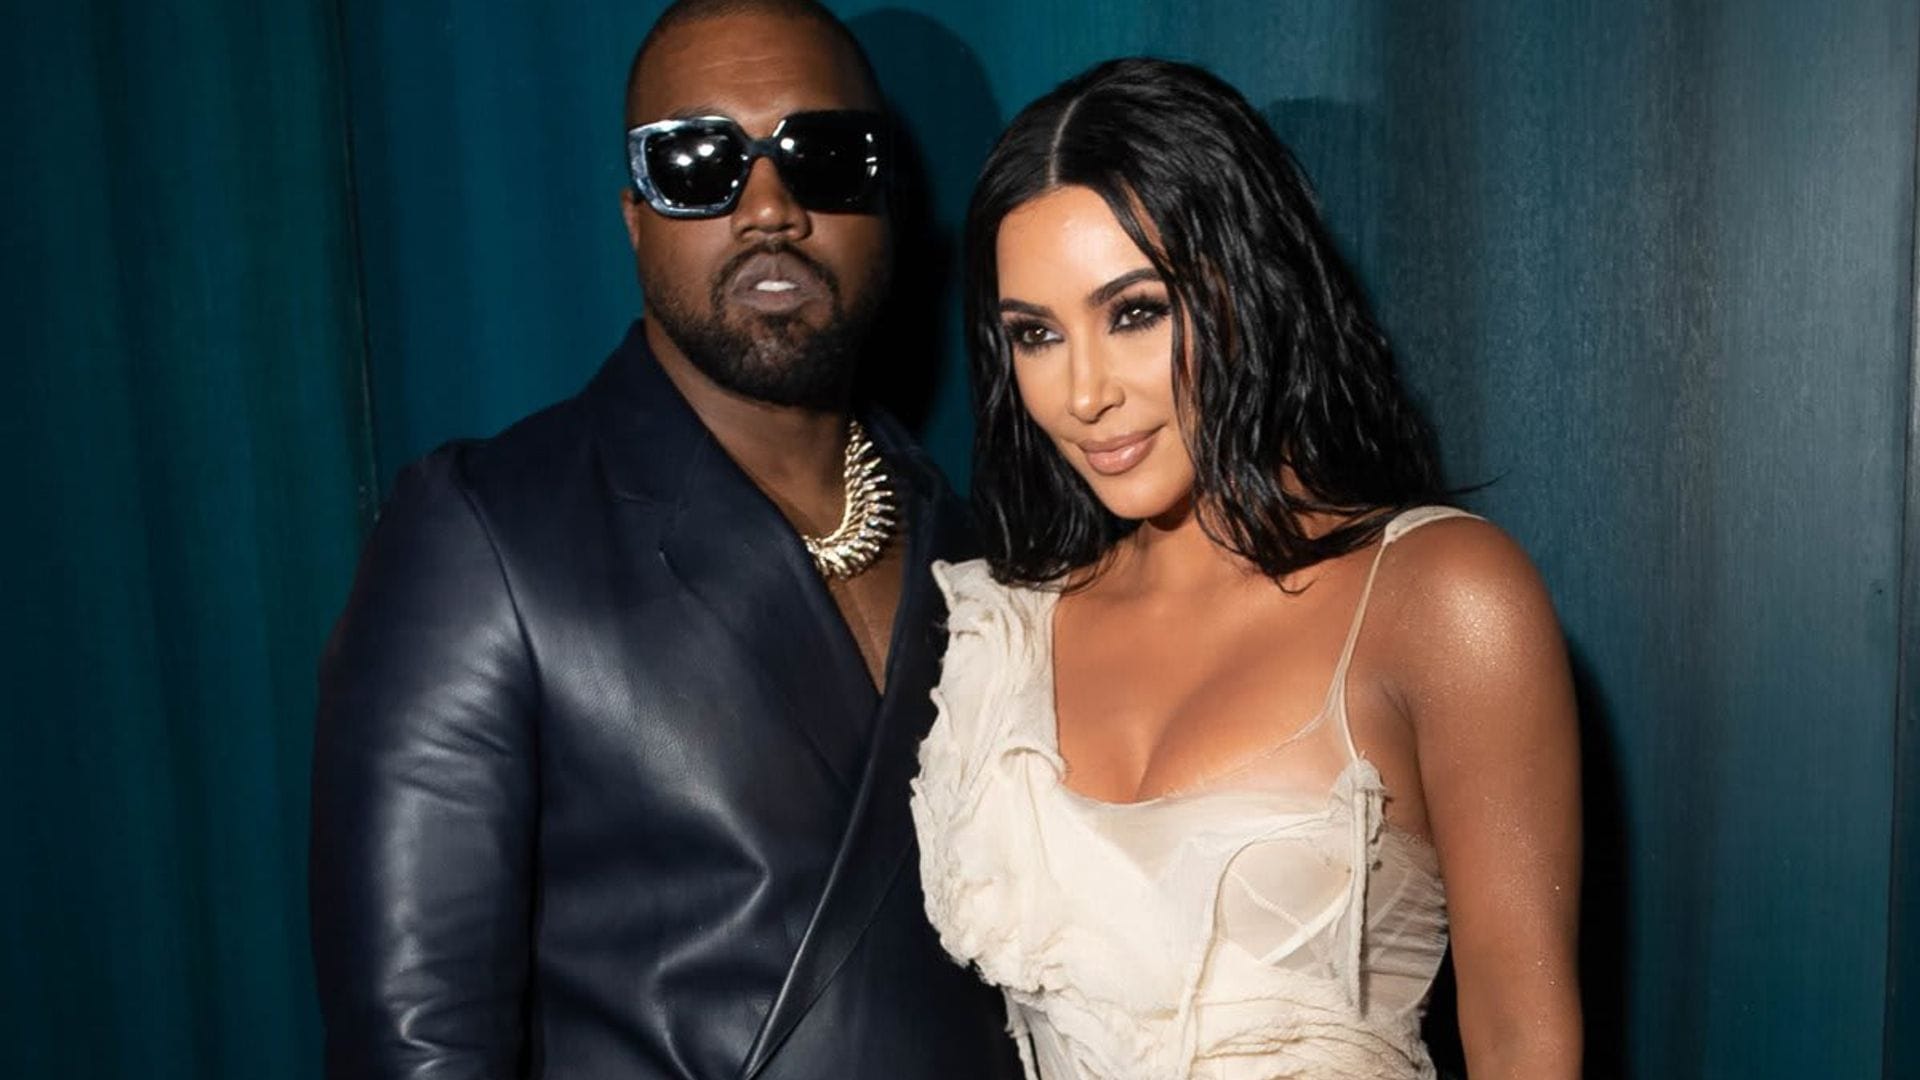 Did Kanye West confirm cheating on Kim Kardashian in new song?